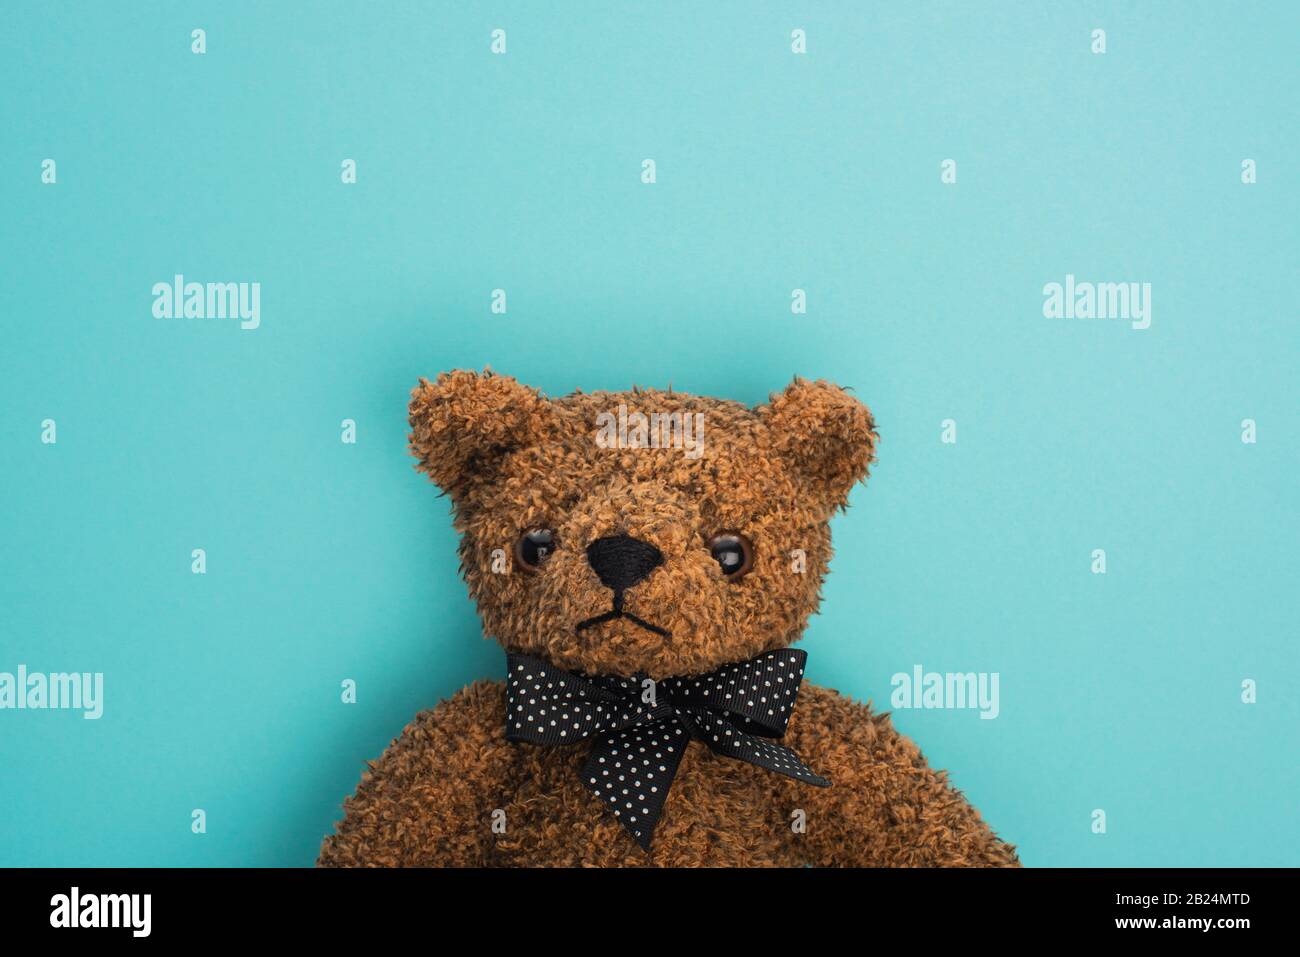 Teddy Bear With Bow High Resolution Stock Photography and Images - Alamy